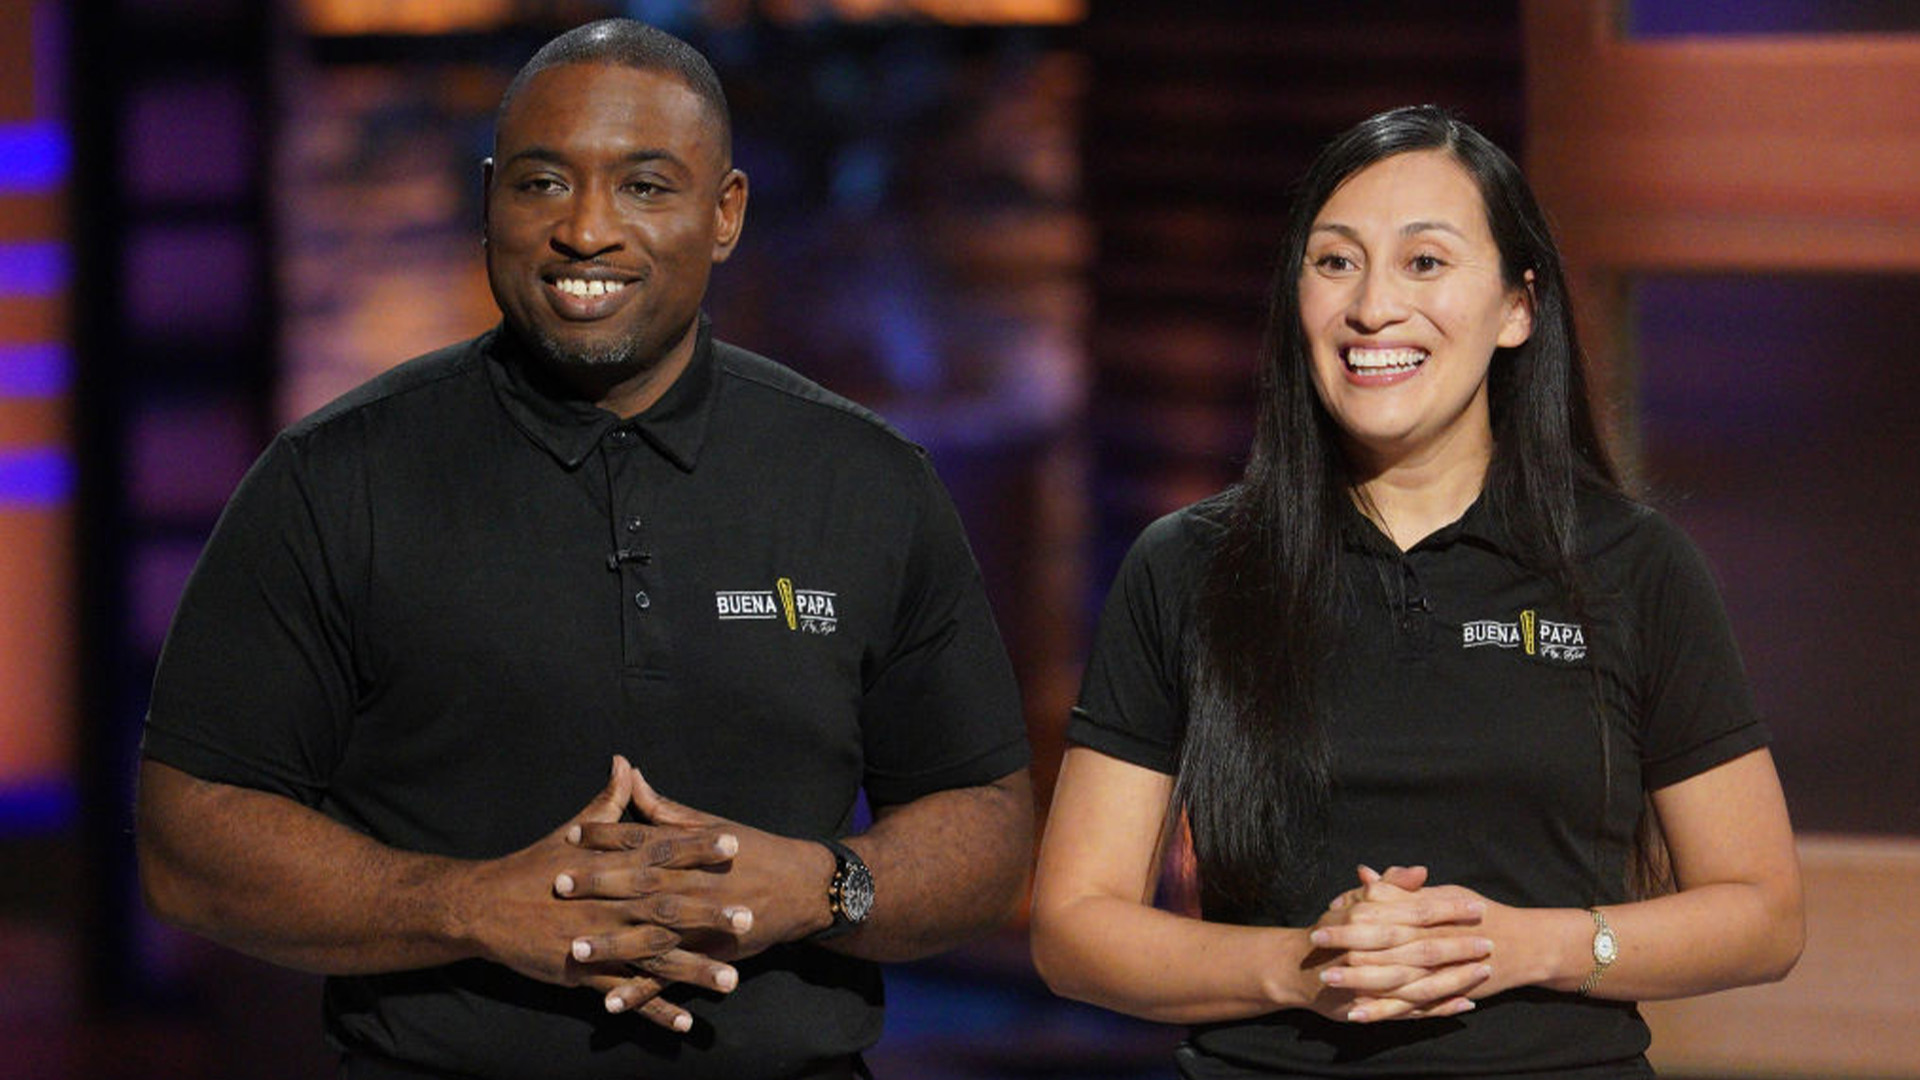 Couple Had $18 Left After Using Their Savings To Open A Restaurant — Now They've Landed A $400K 'Shark Tank' Investment